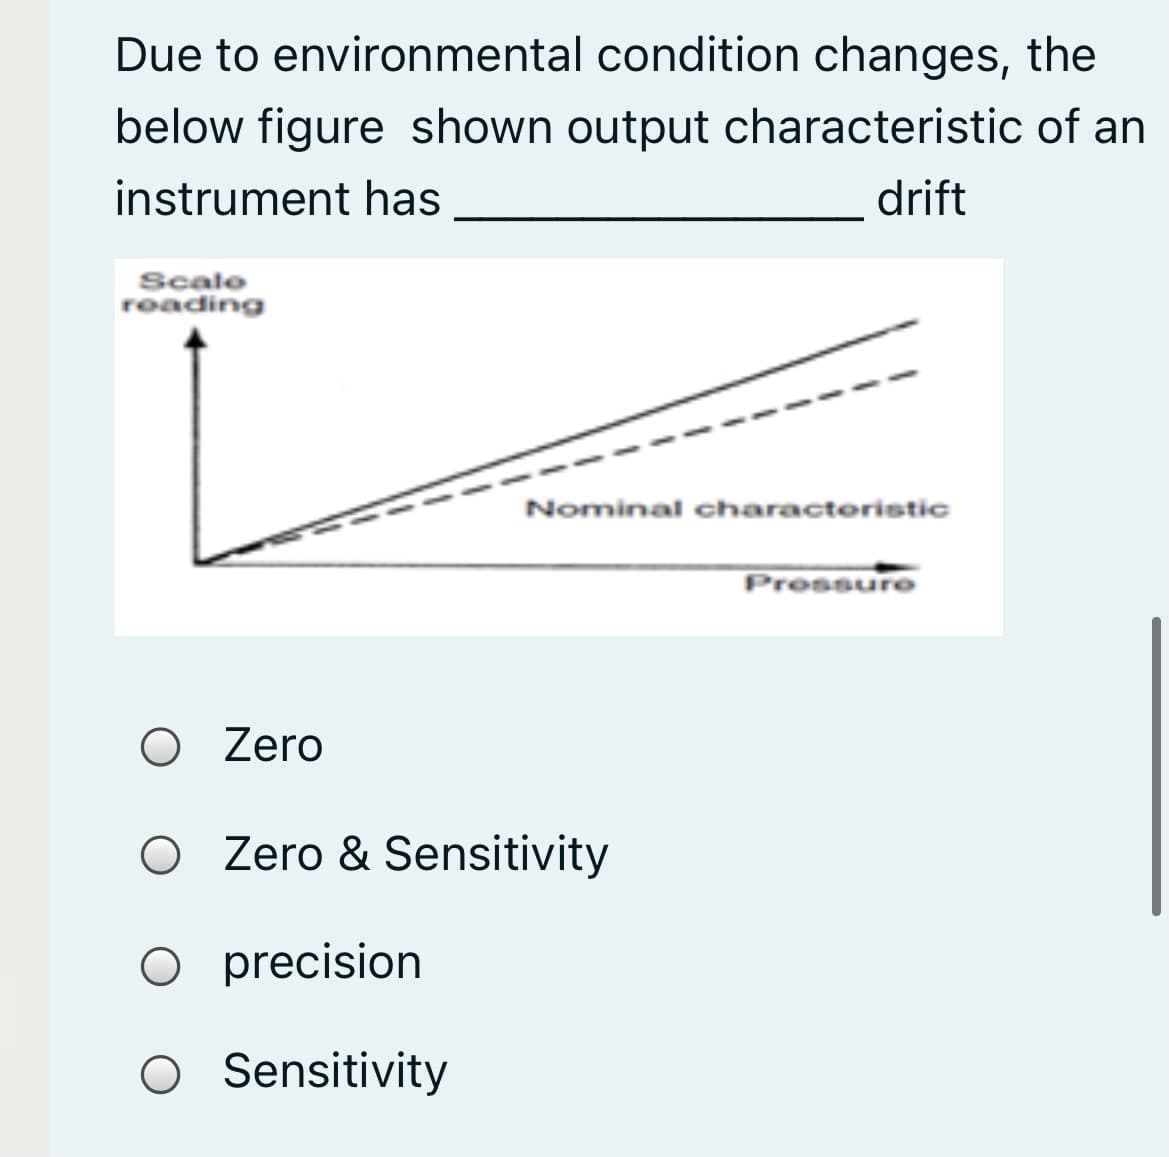 Due to environmental condition changes, the
below figure shown output characteristic of an
instrument has
drift
Scale
reading
Nominal charactoristic
Pressure
O Zero
O Zero & Sensitivity
O precision
Sensitivity
